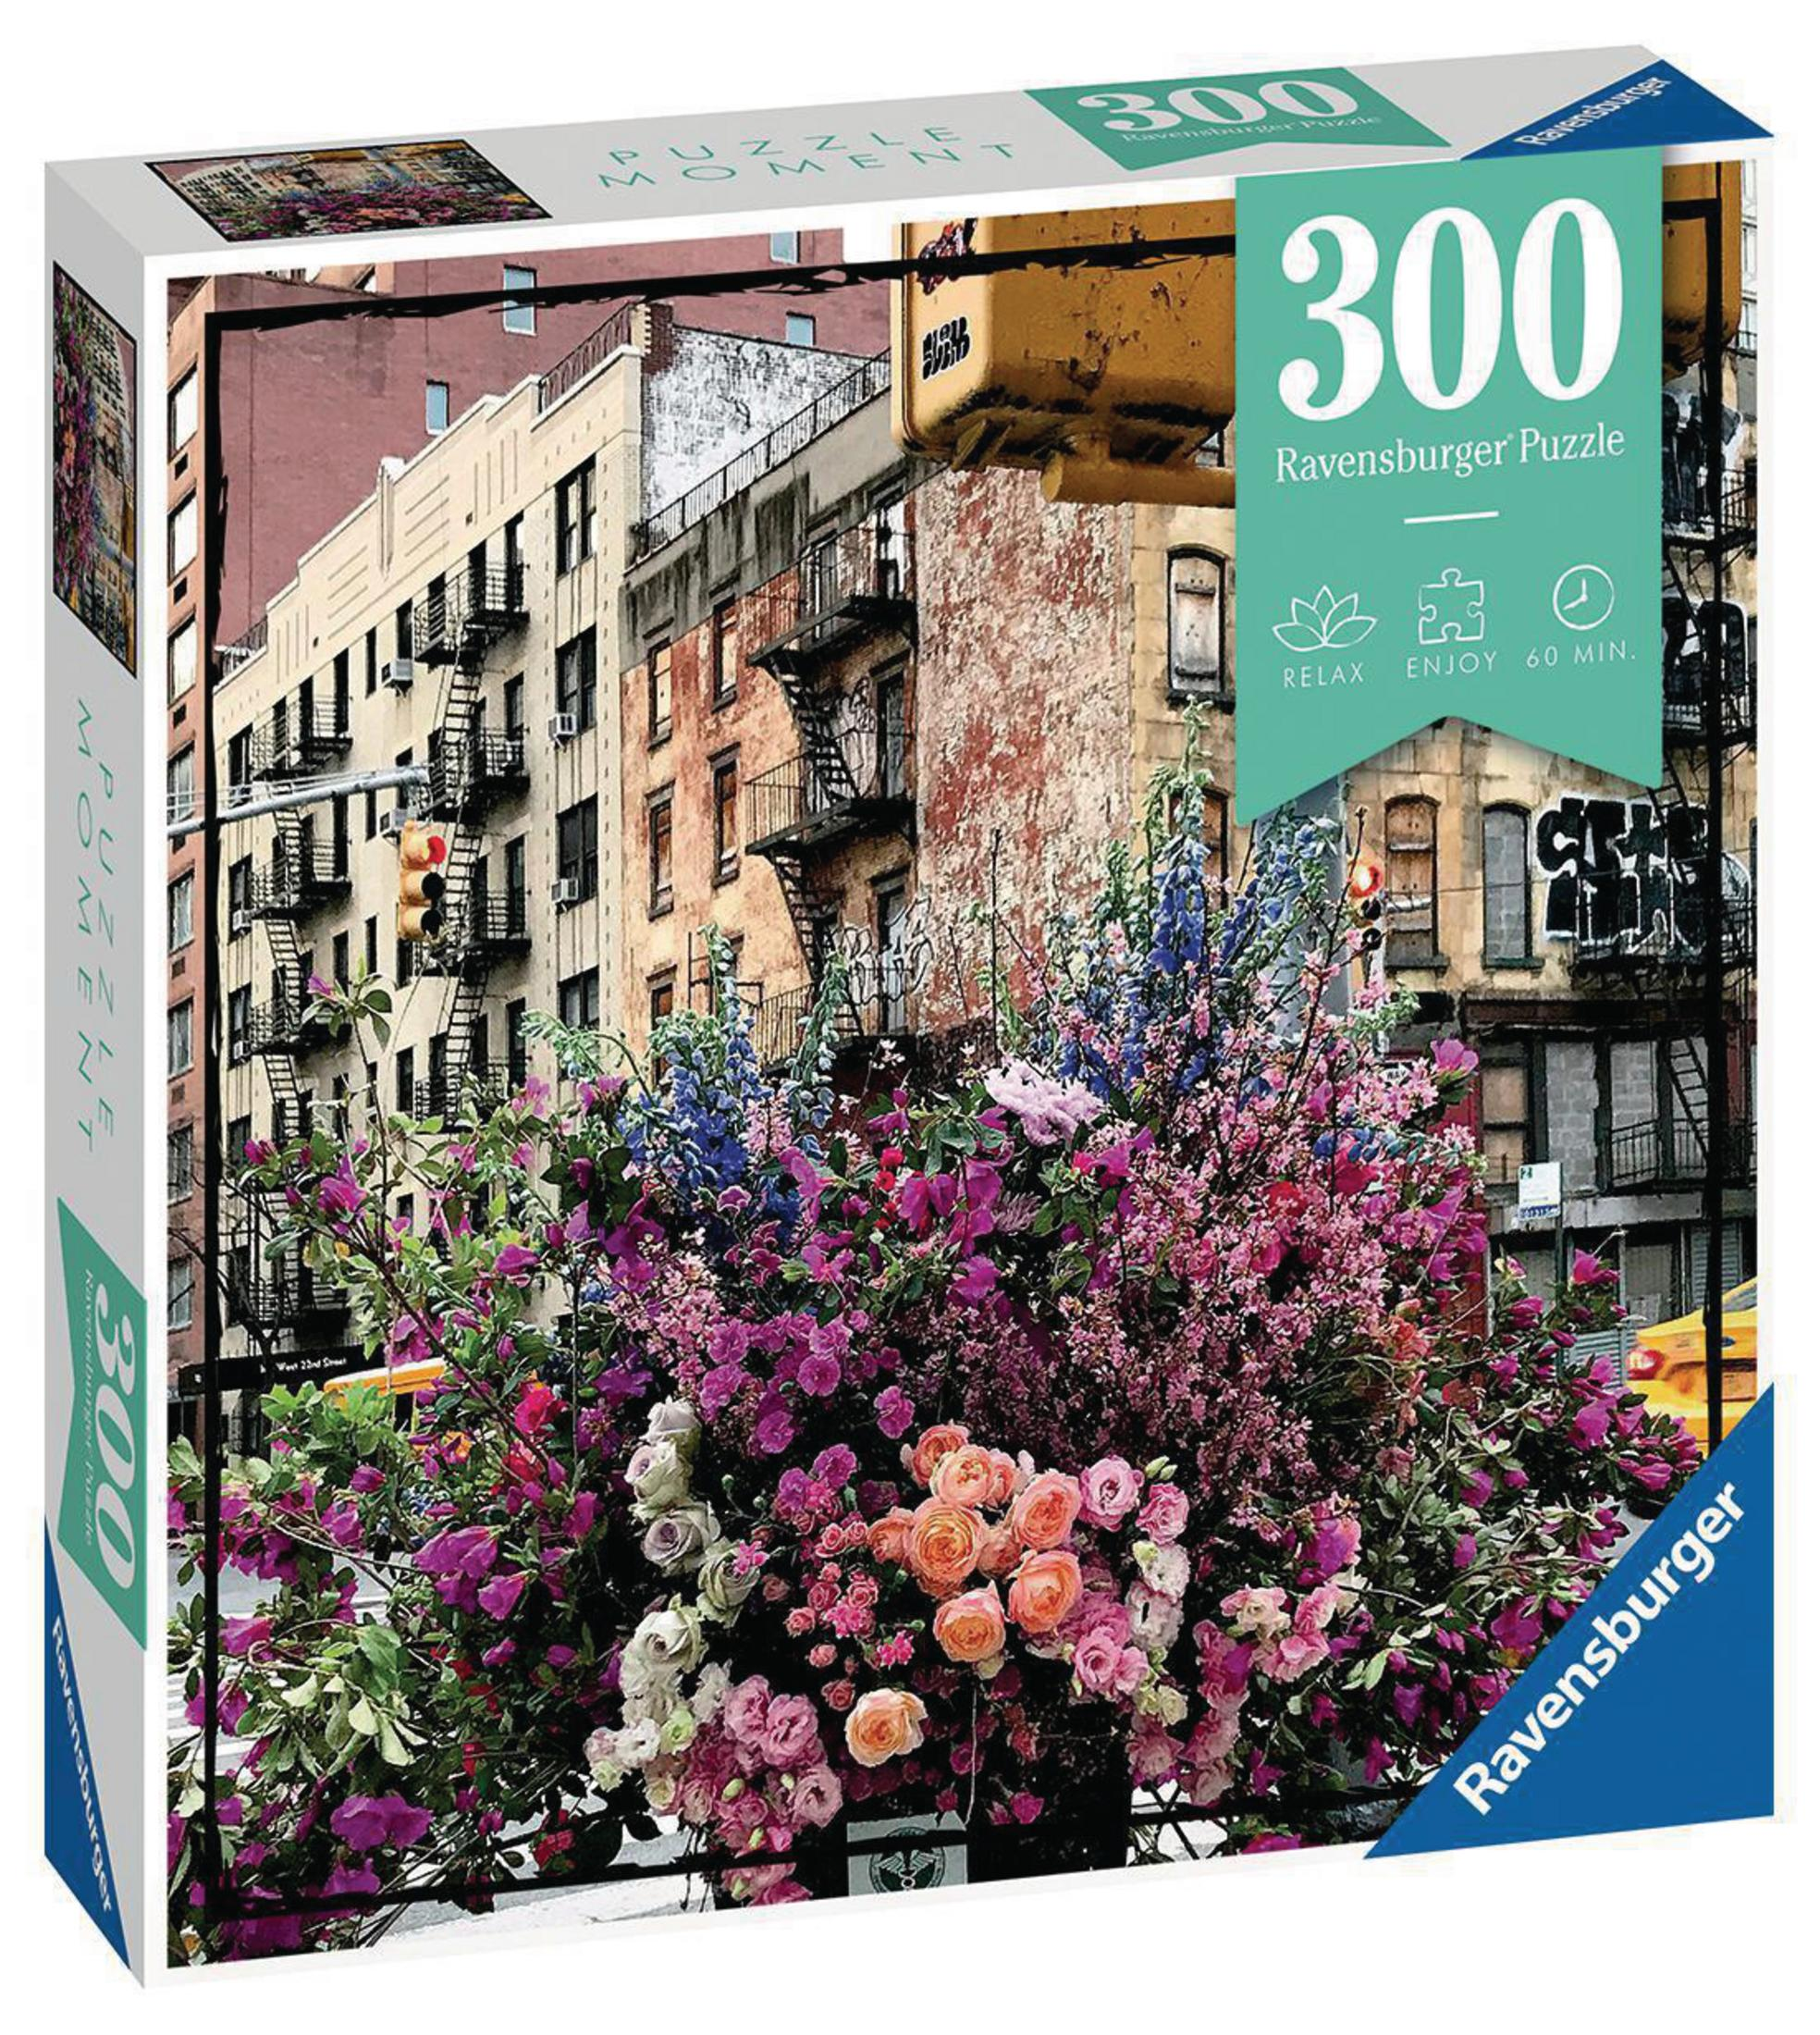 YORK NEW FLOWERS IN 12964 RAVENSBURGER Puzzle